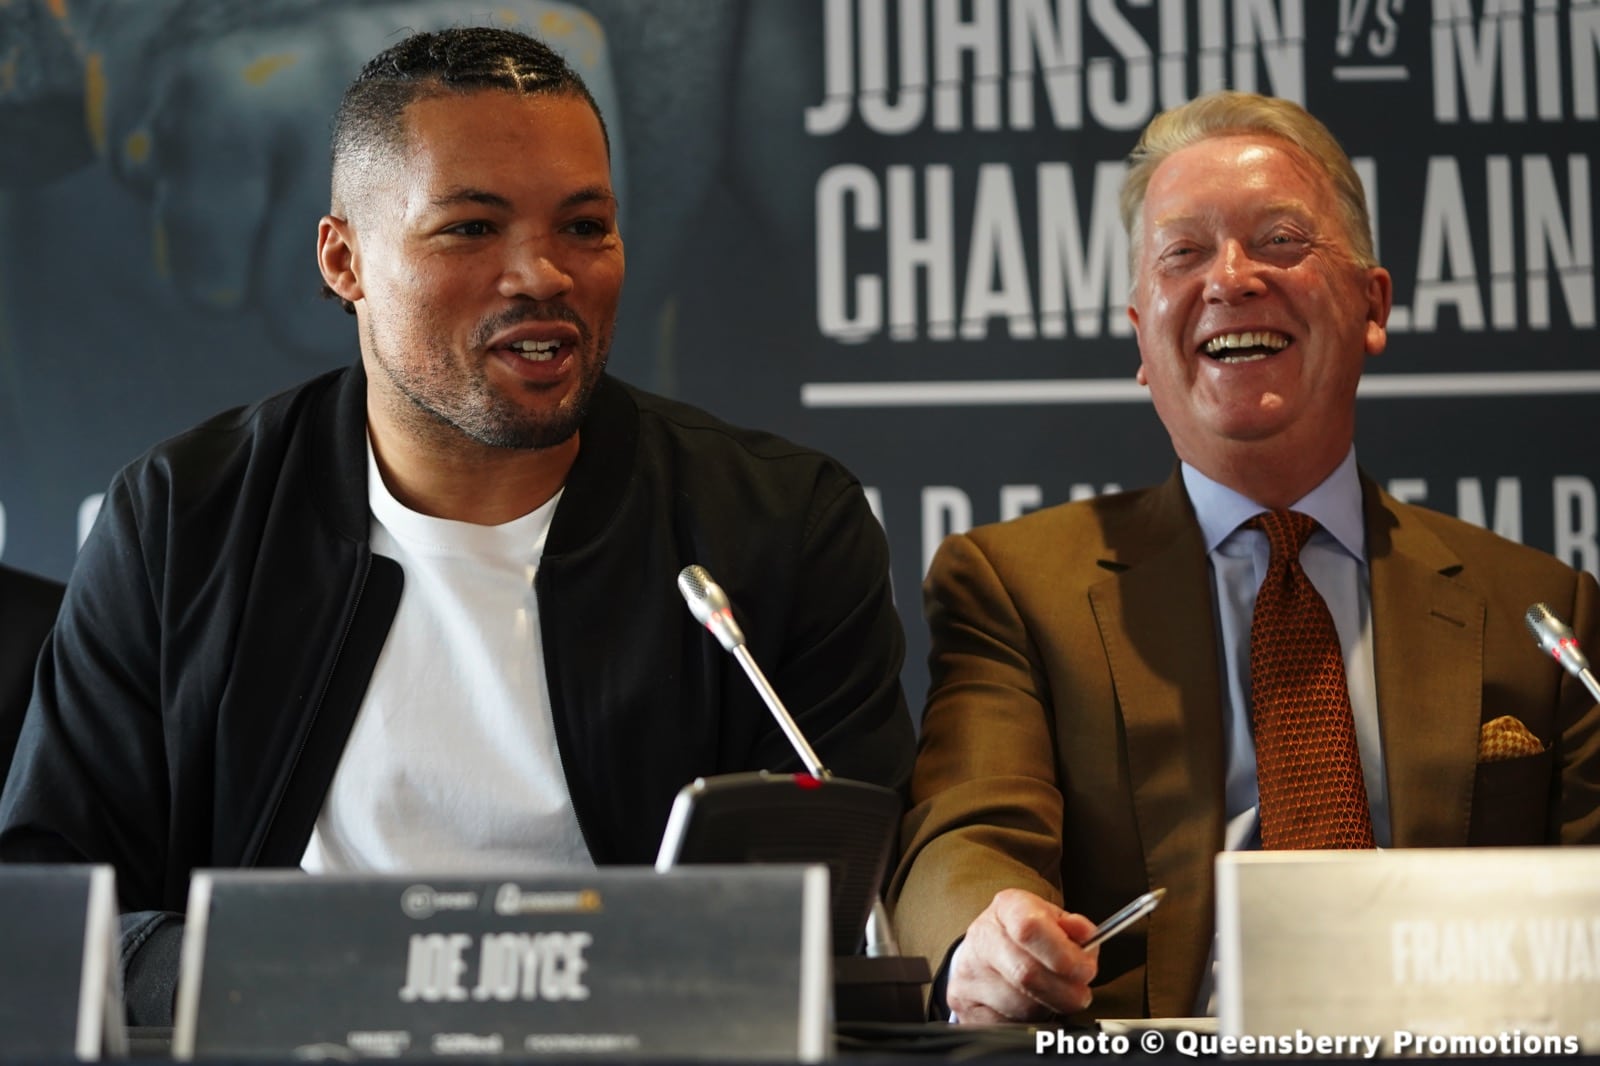 Image: Joseph Parker and Joe Joyce have agreed to deal for Sept.24th on BT Sport Box Office